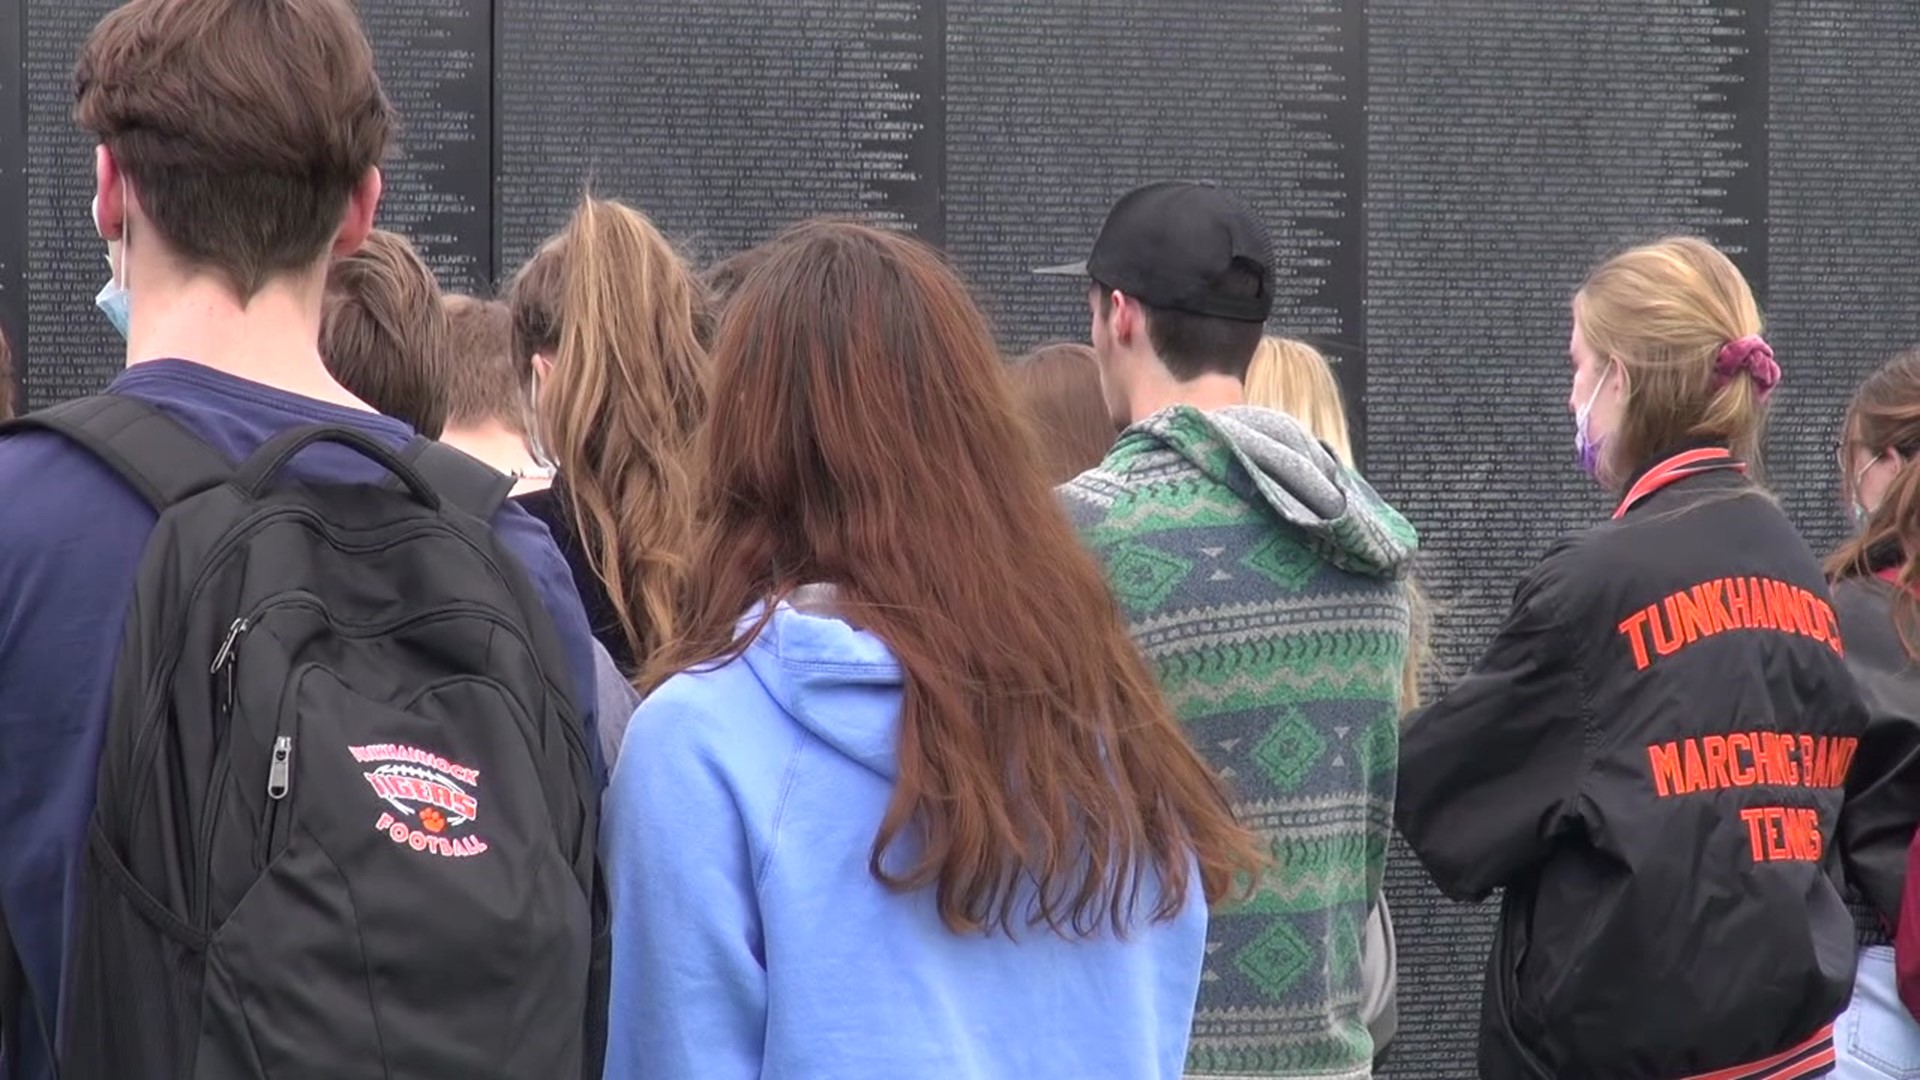 The Wall That Heals, the traveling Vietnam memorial is on display on the football field at Tunkhannock Area High School, where students got a chance to see it.